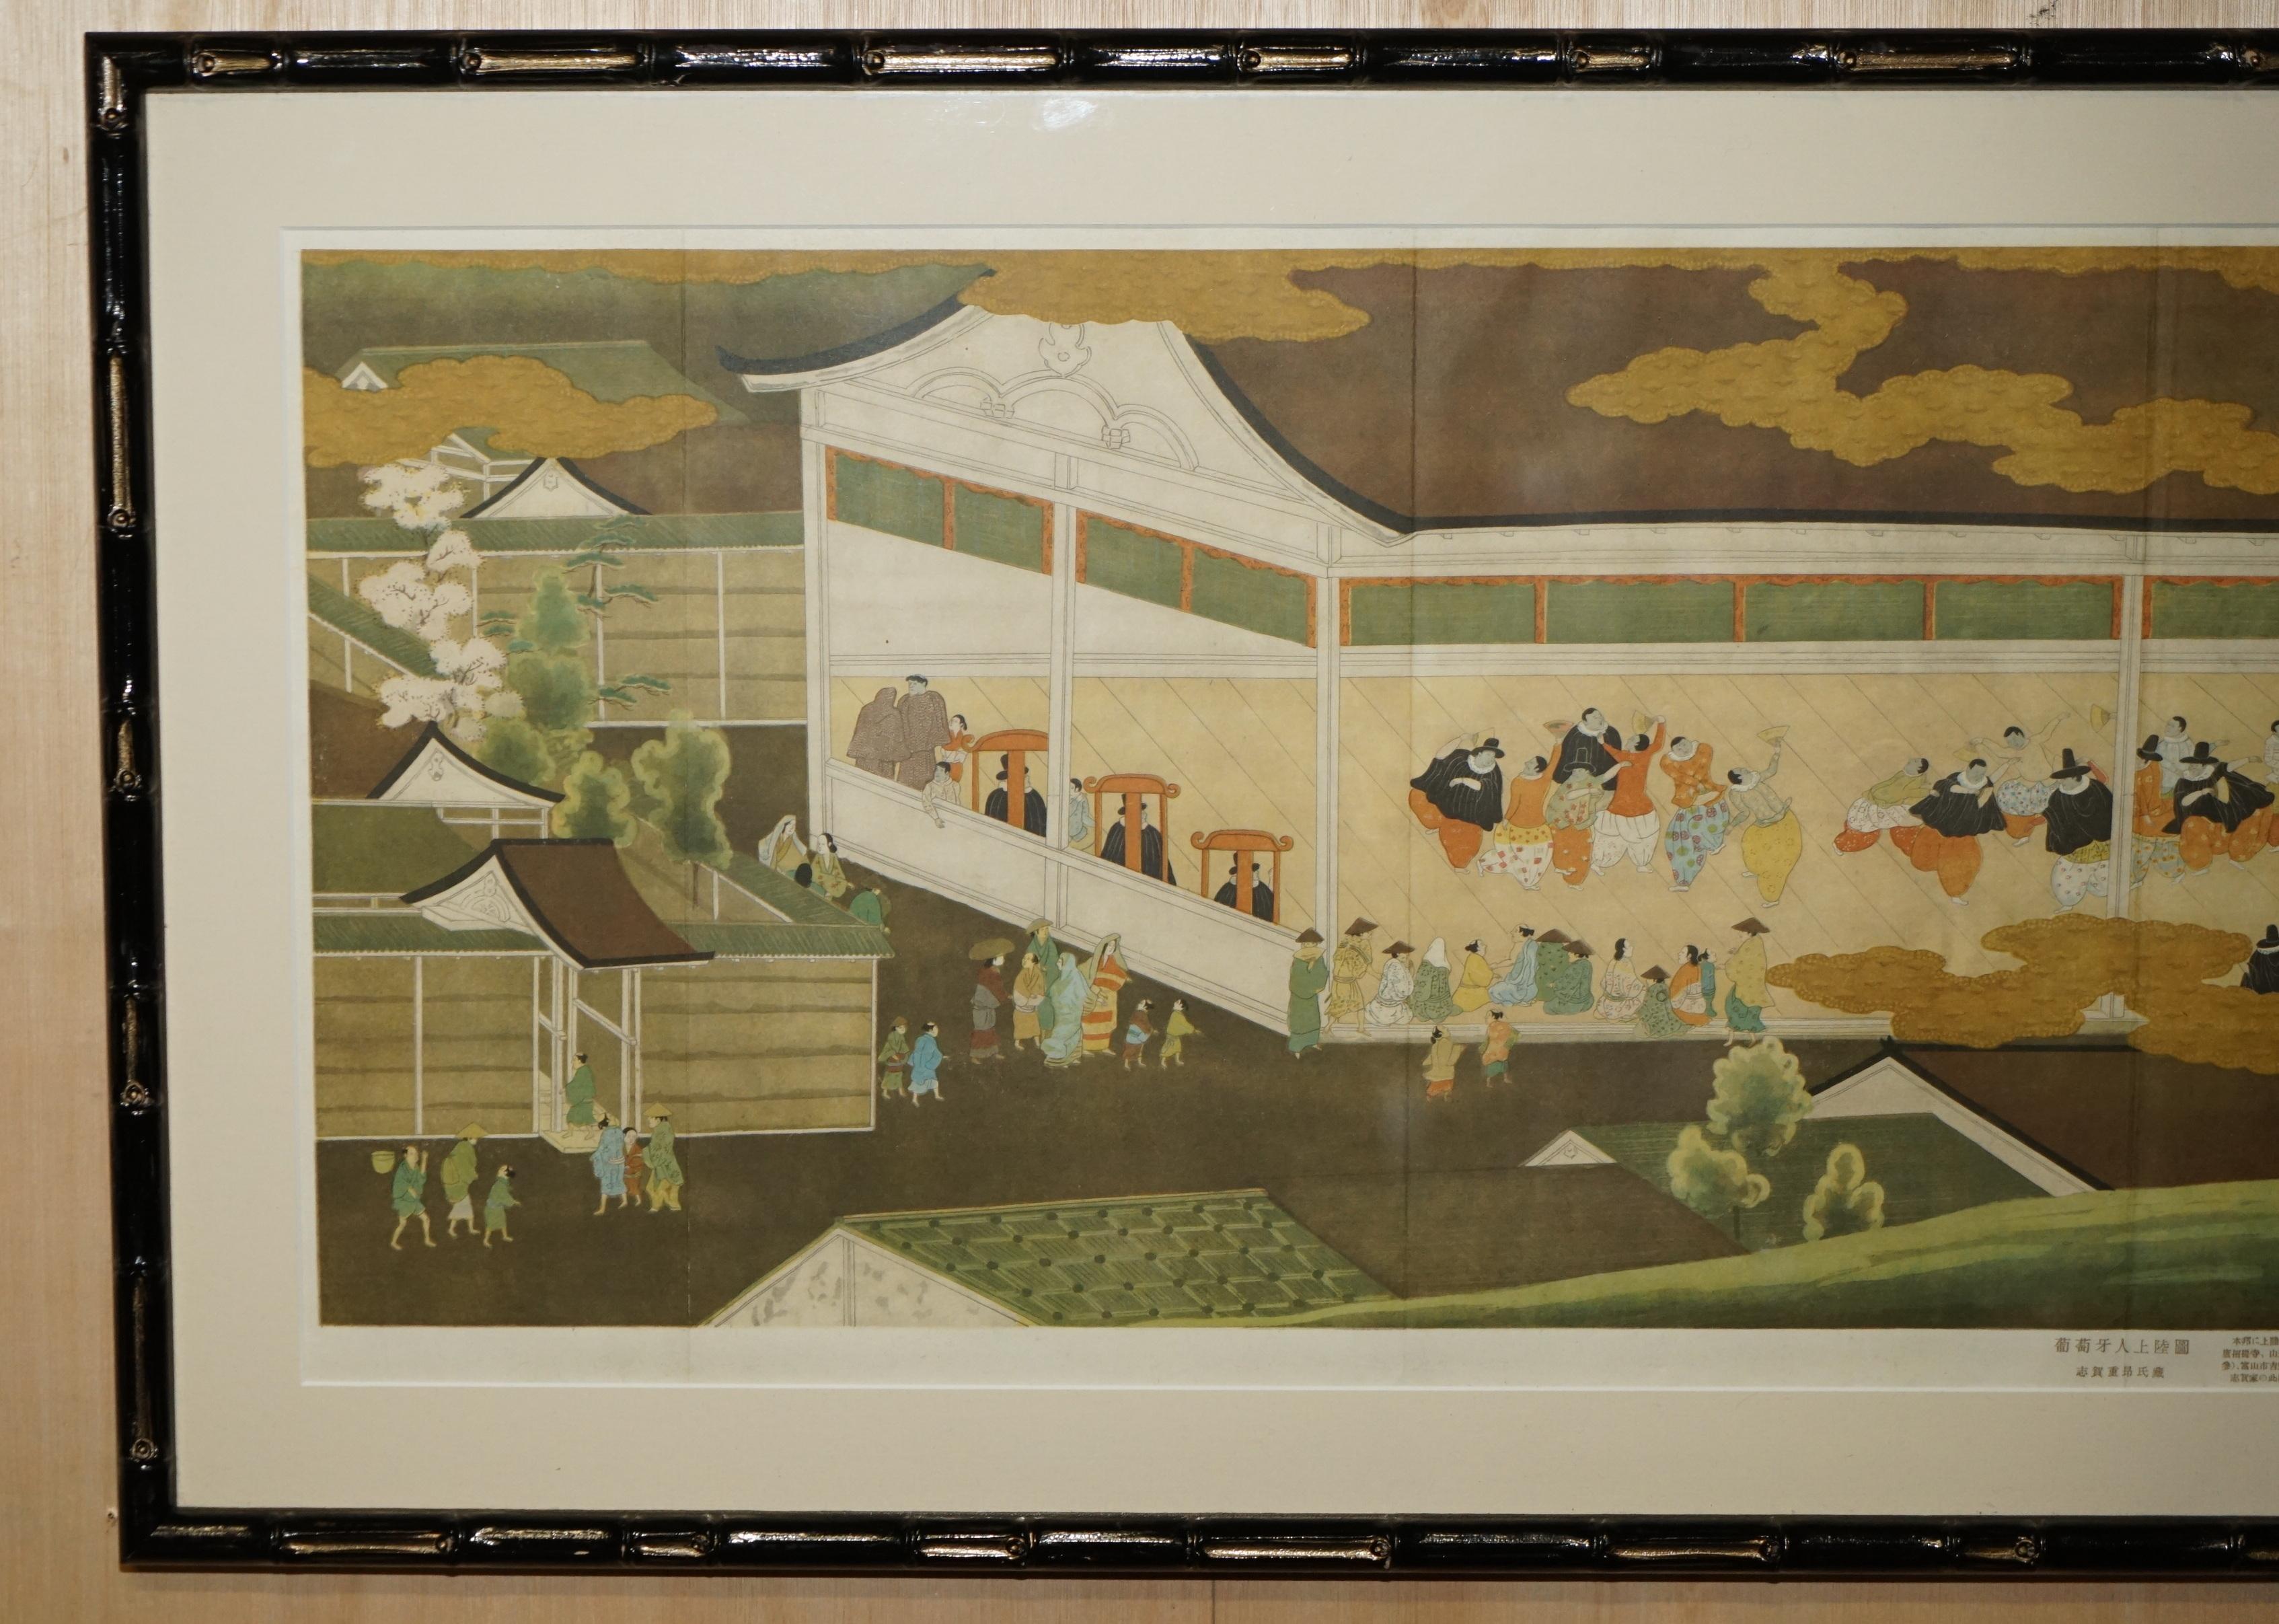 Royal House Antiques

Royal House Antiques is delighted to offer for sale this stunning original Meiji period circa 1880 Japanese print of Shiga Shigeaki’s family estate in the original bamboo carved frame

A very good looking well made and